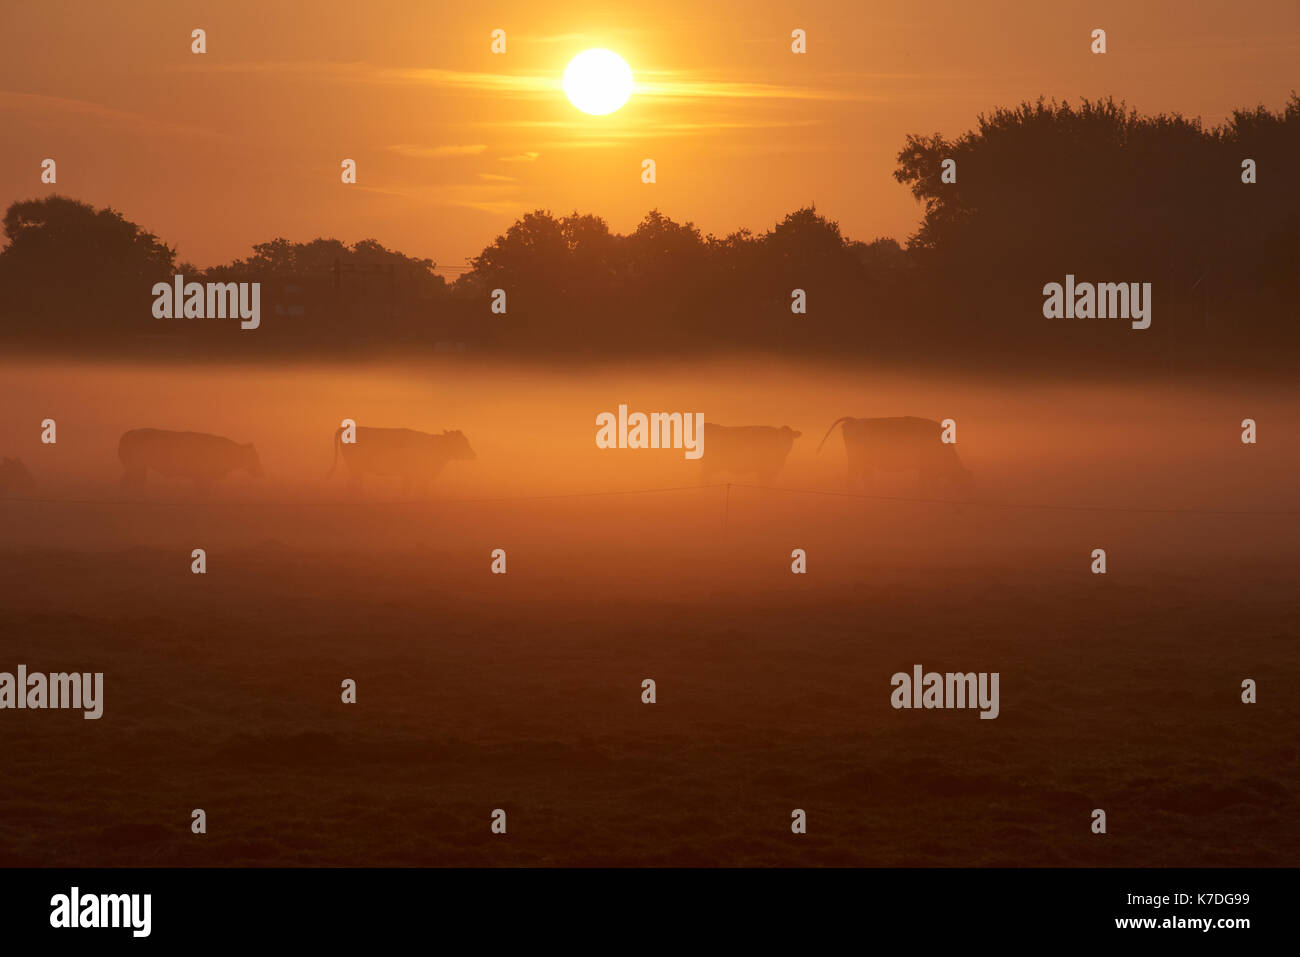 Cows grazing on field during sunrise Stock Photo